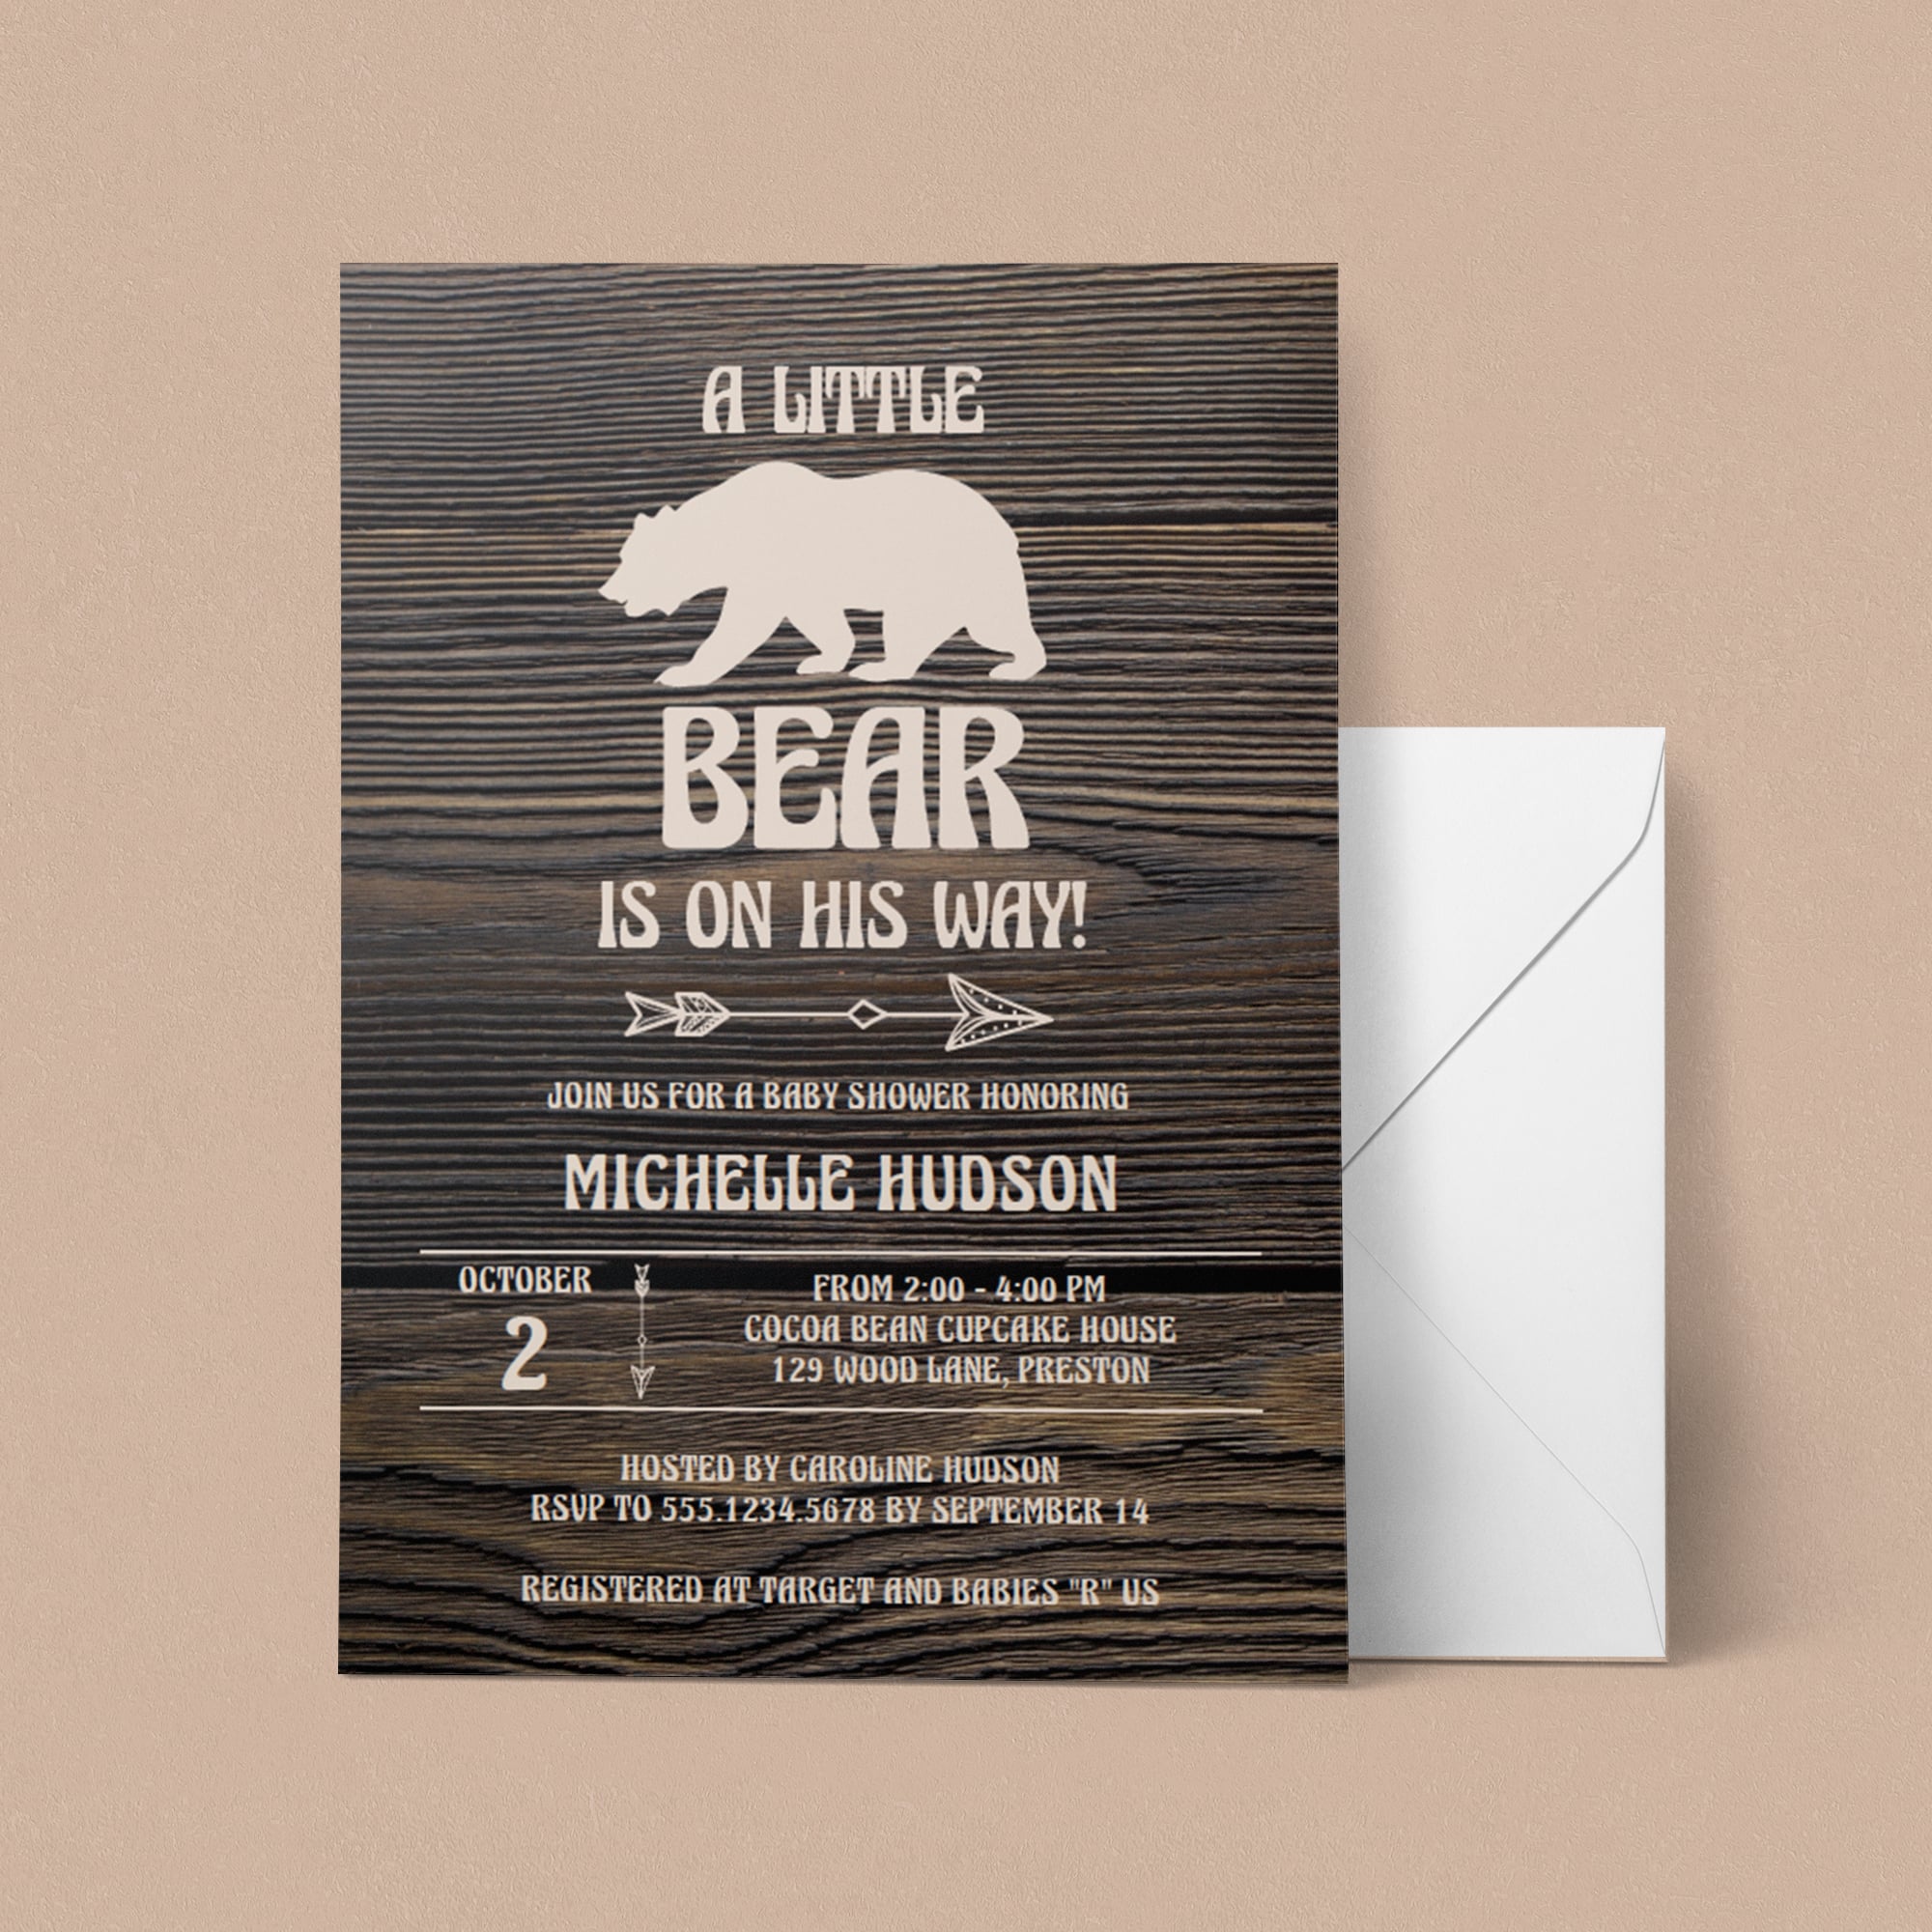 Printable invitation for bear themed baby shower by LittleSizzle